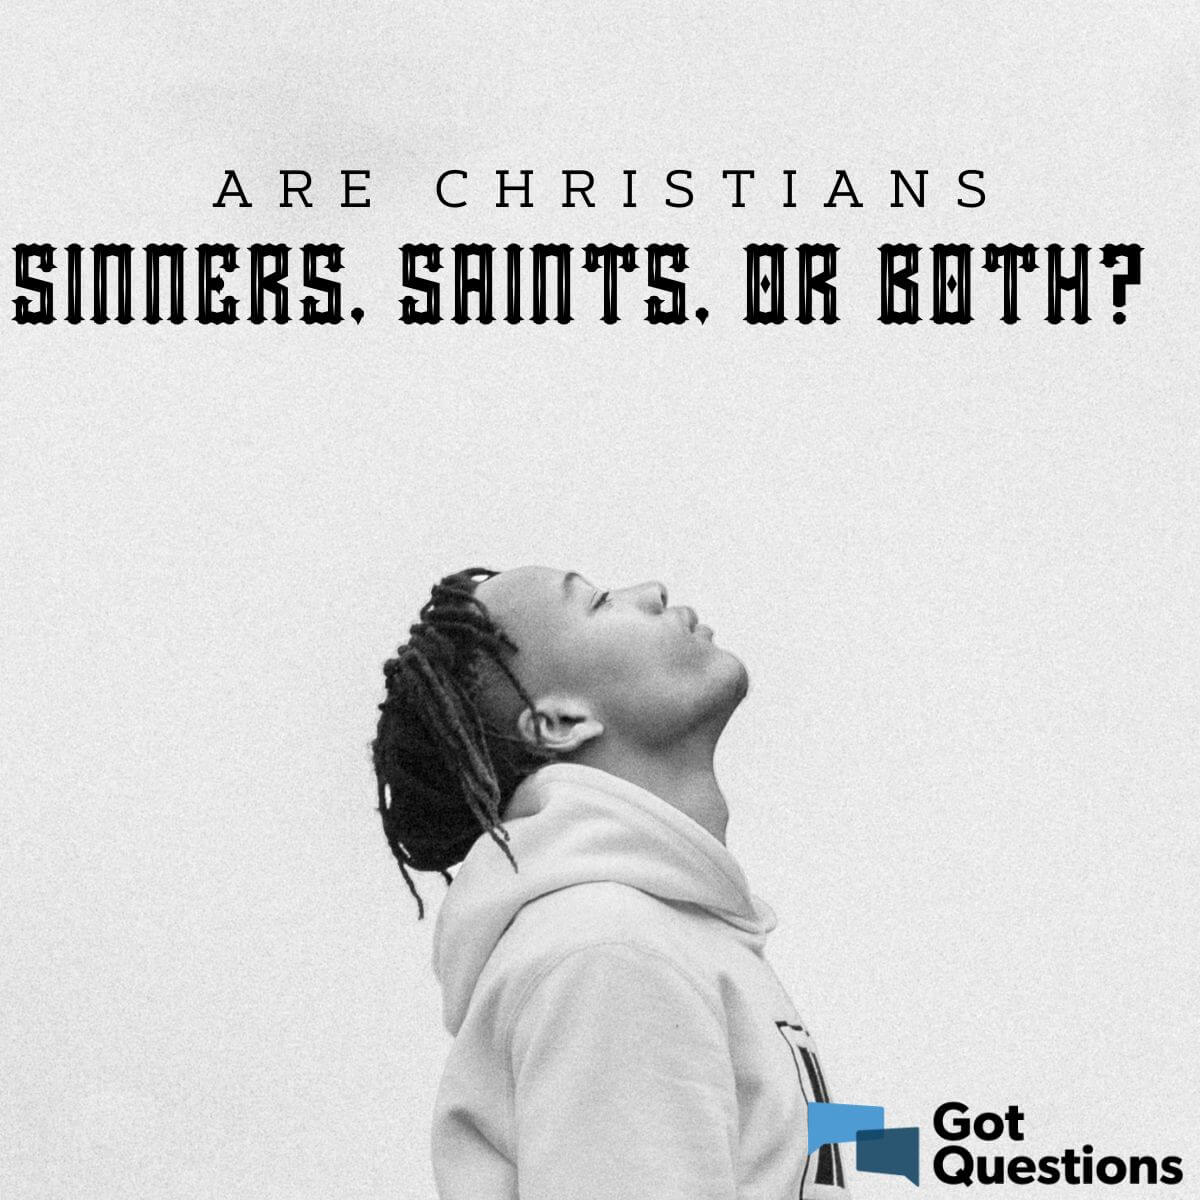 Are Christians sinners, saints, or both?